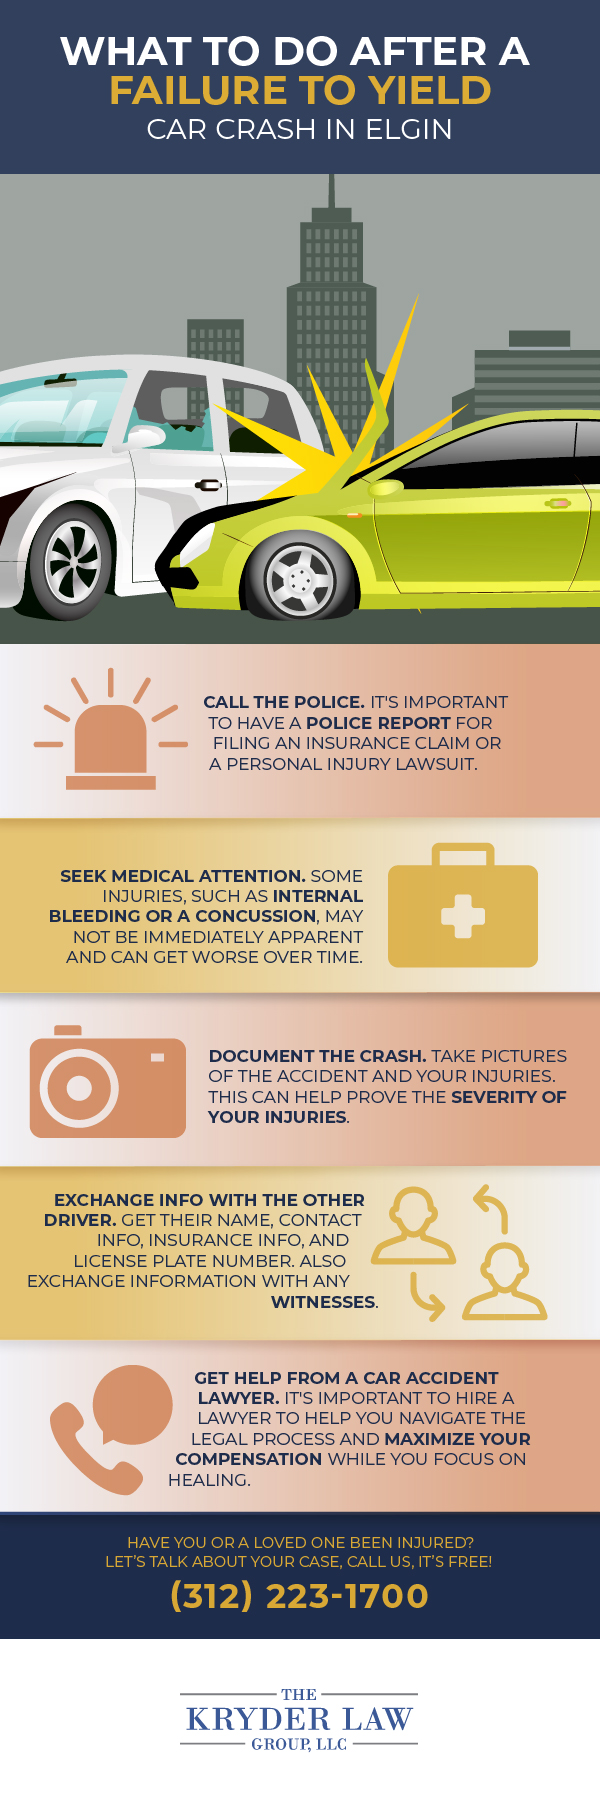 What to Do After a Failure to Yield Car Crash in Elgin Infographic